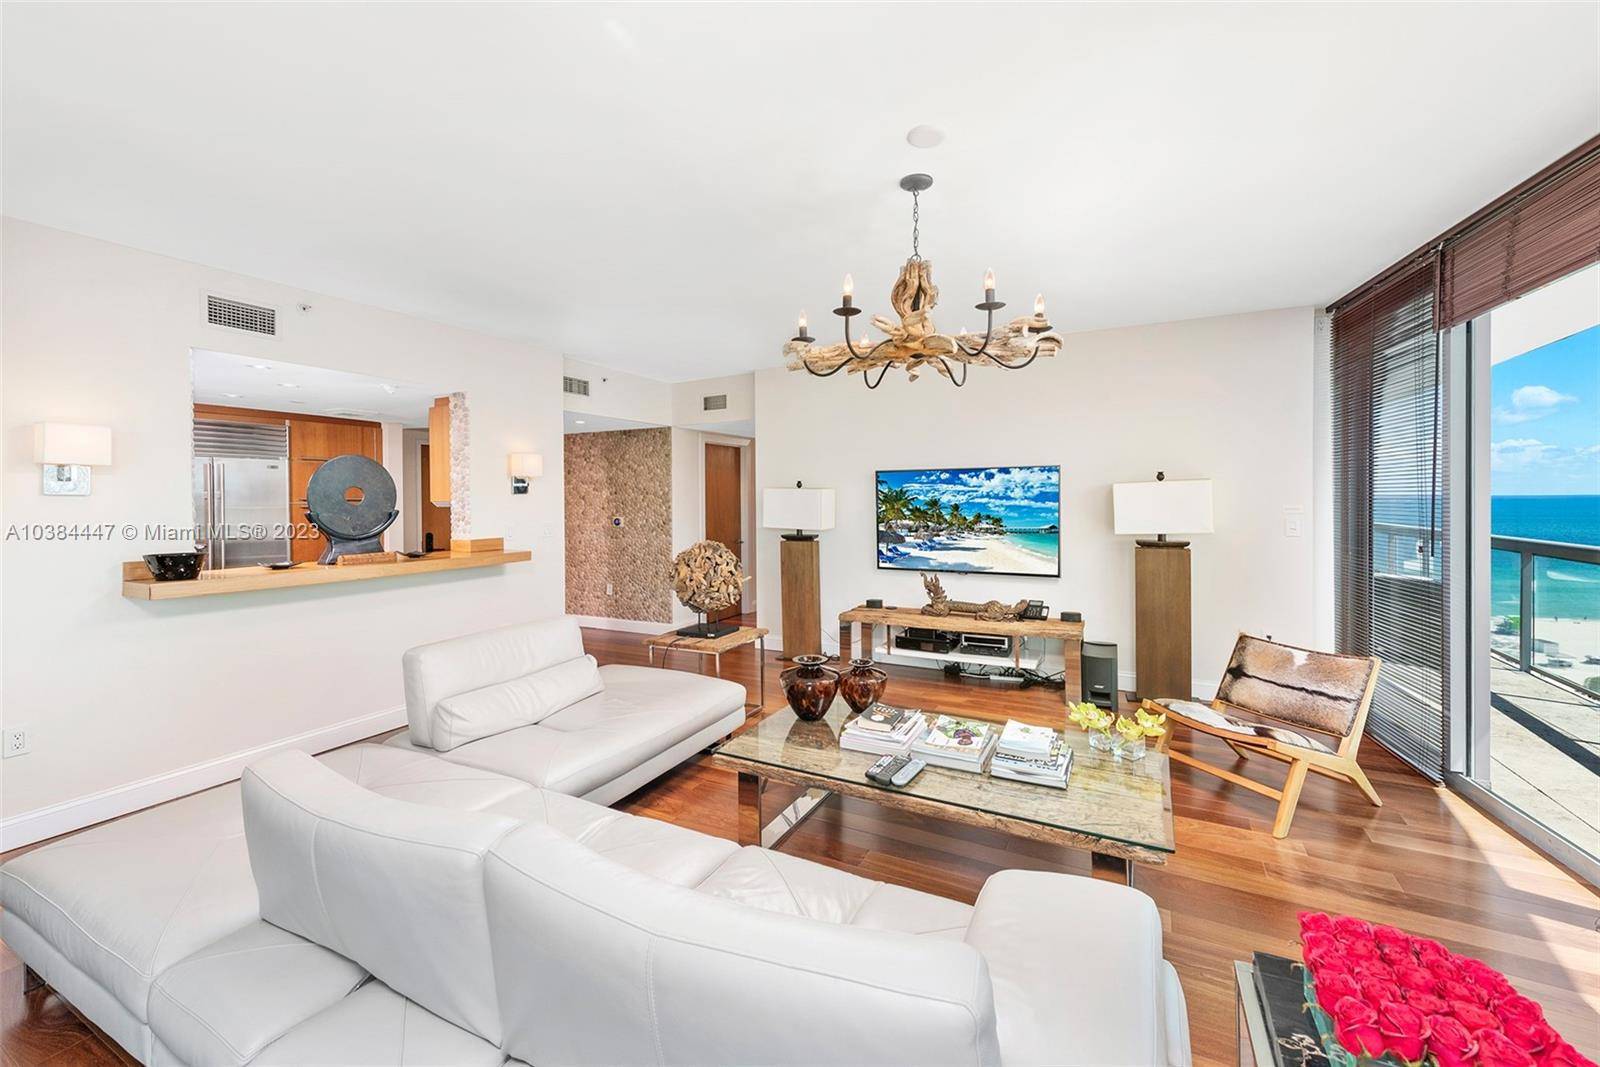 Beautifully decorated and spacious 2 bedroom at the world renowned Setai.